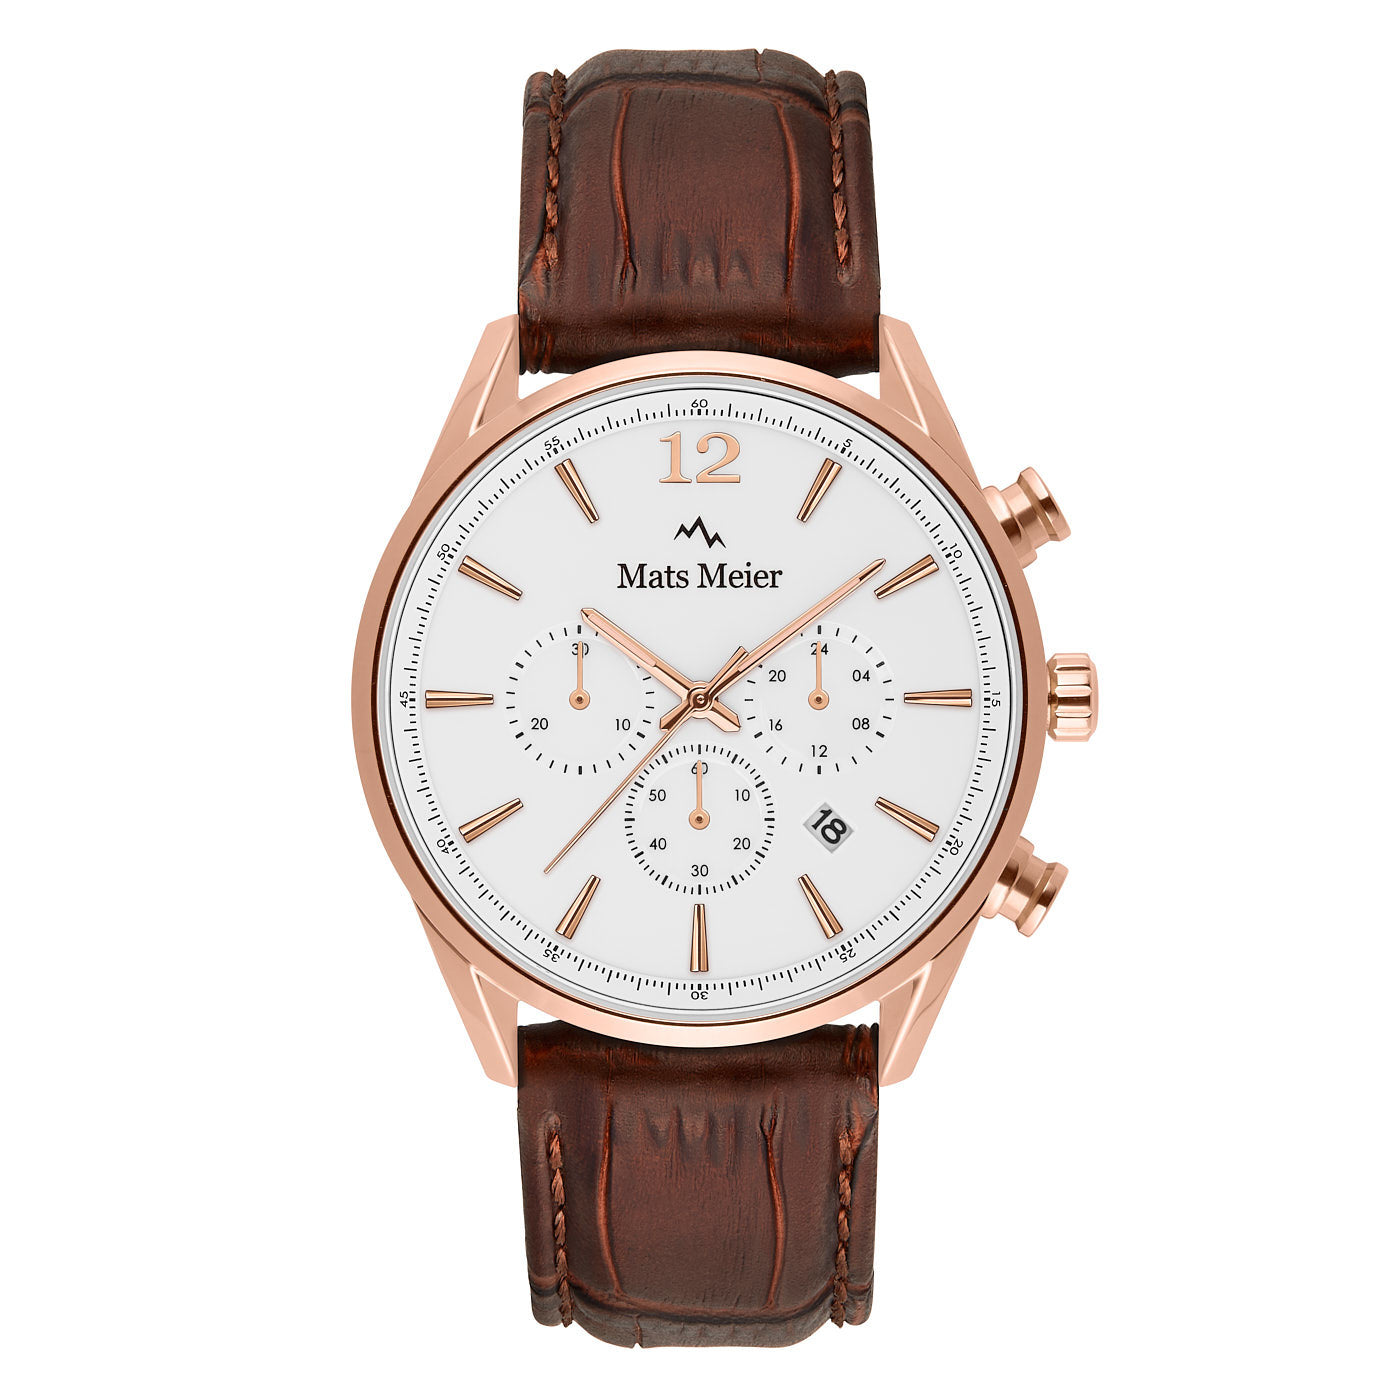 Grand Cornier chronograph mens watch white / rose gold colored / brown